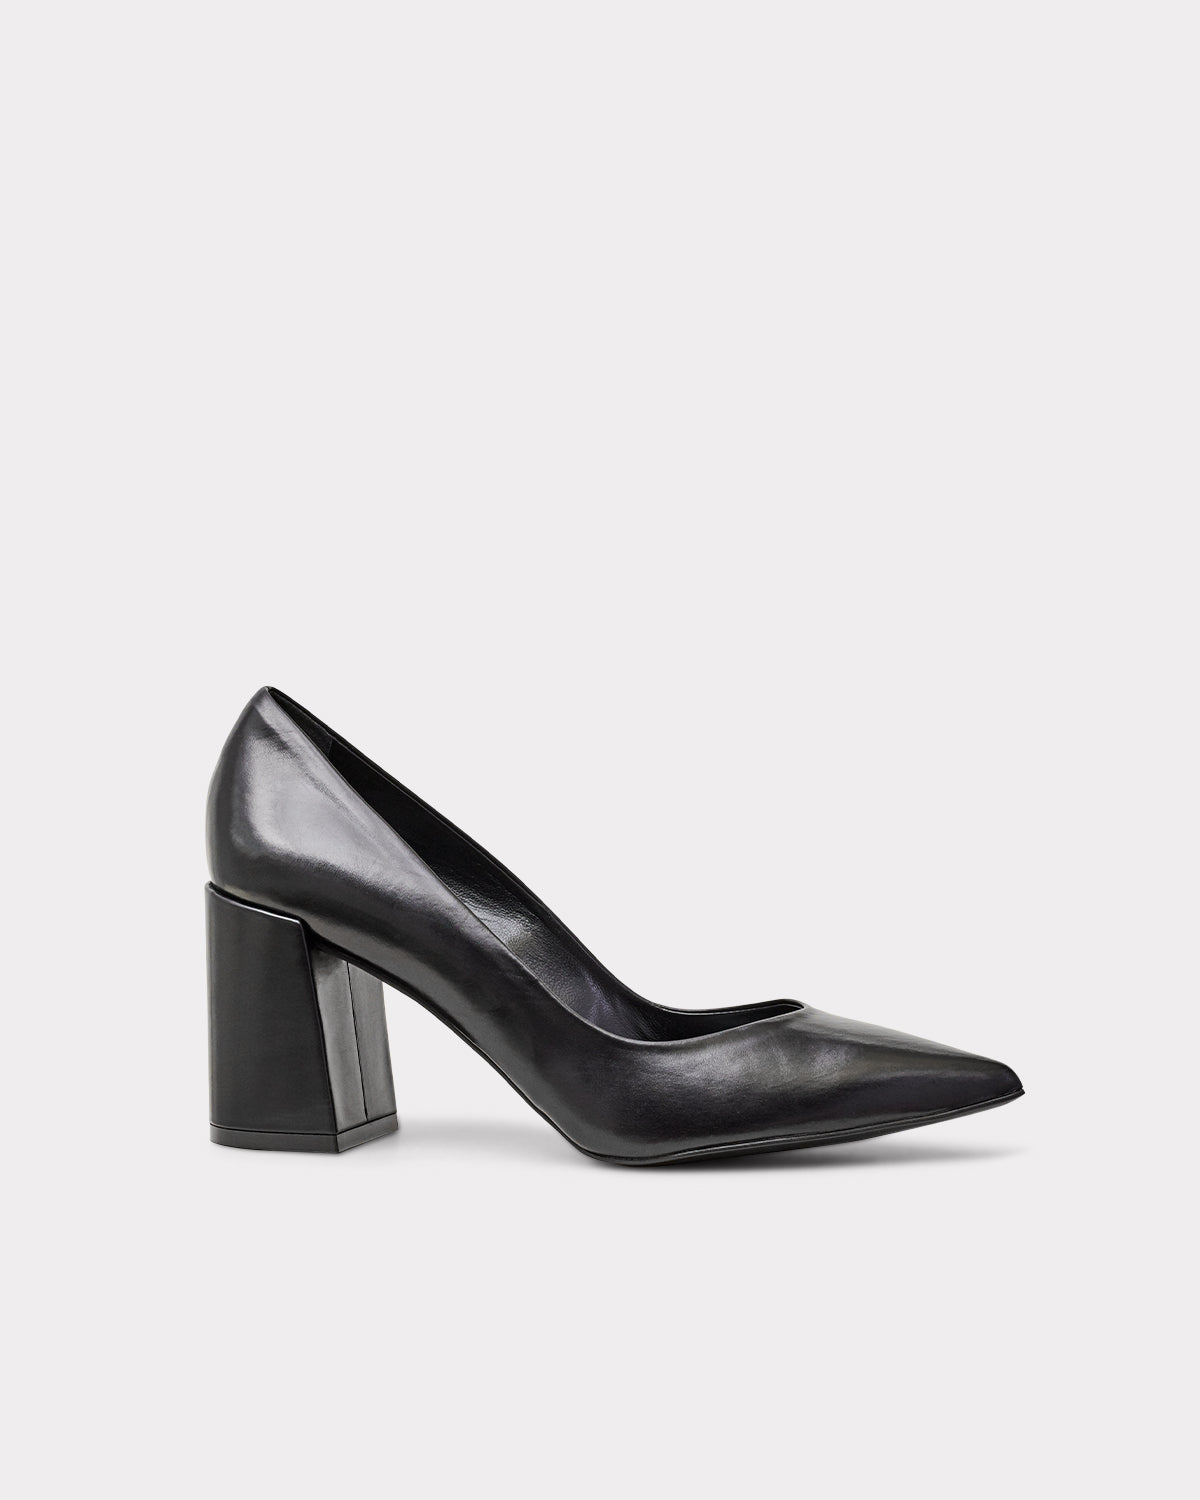 classic black pumps with block heel and pointed toe